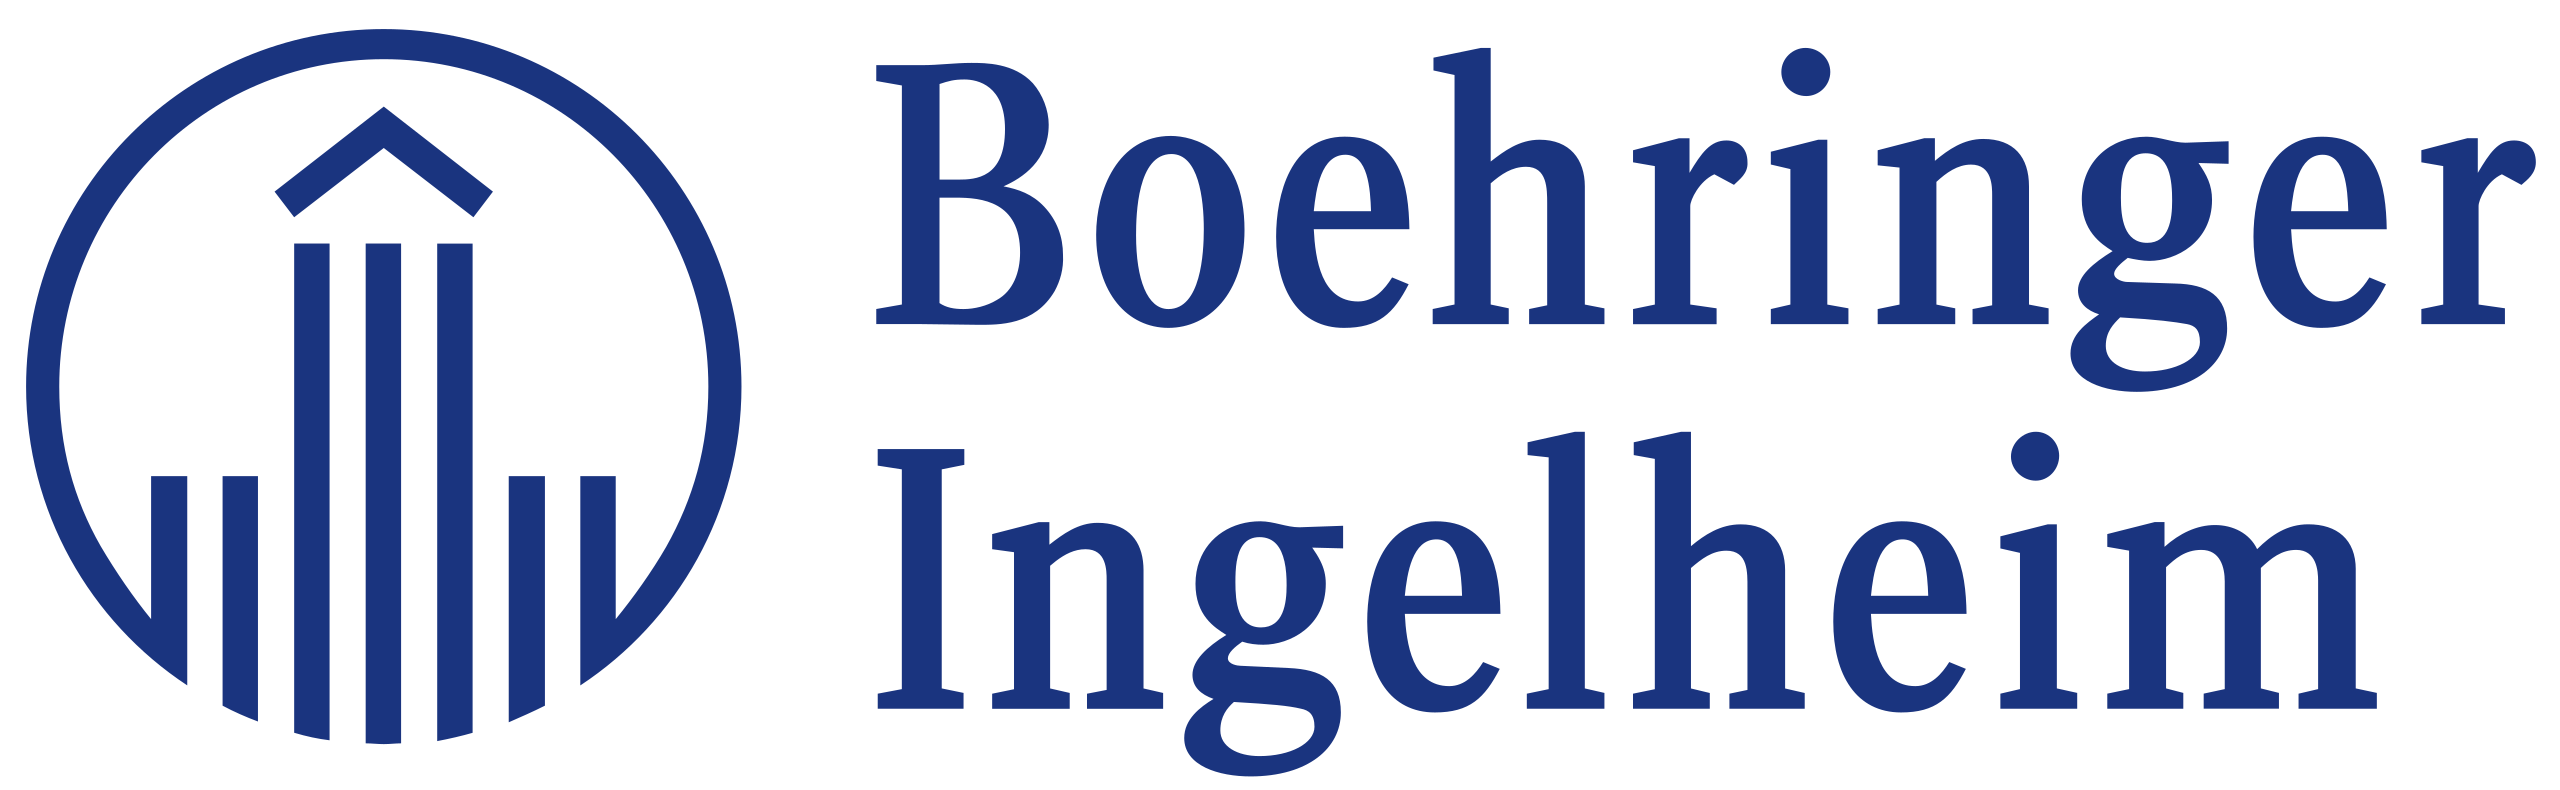 "Boehringer Ingelheim" in blue letters with a blue logo to the left of the lettering